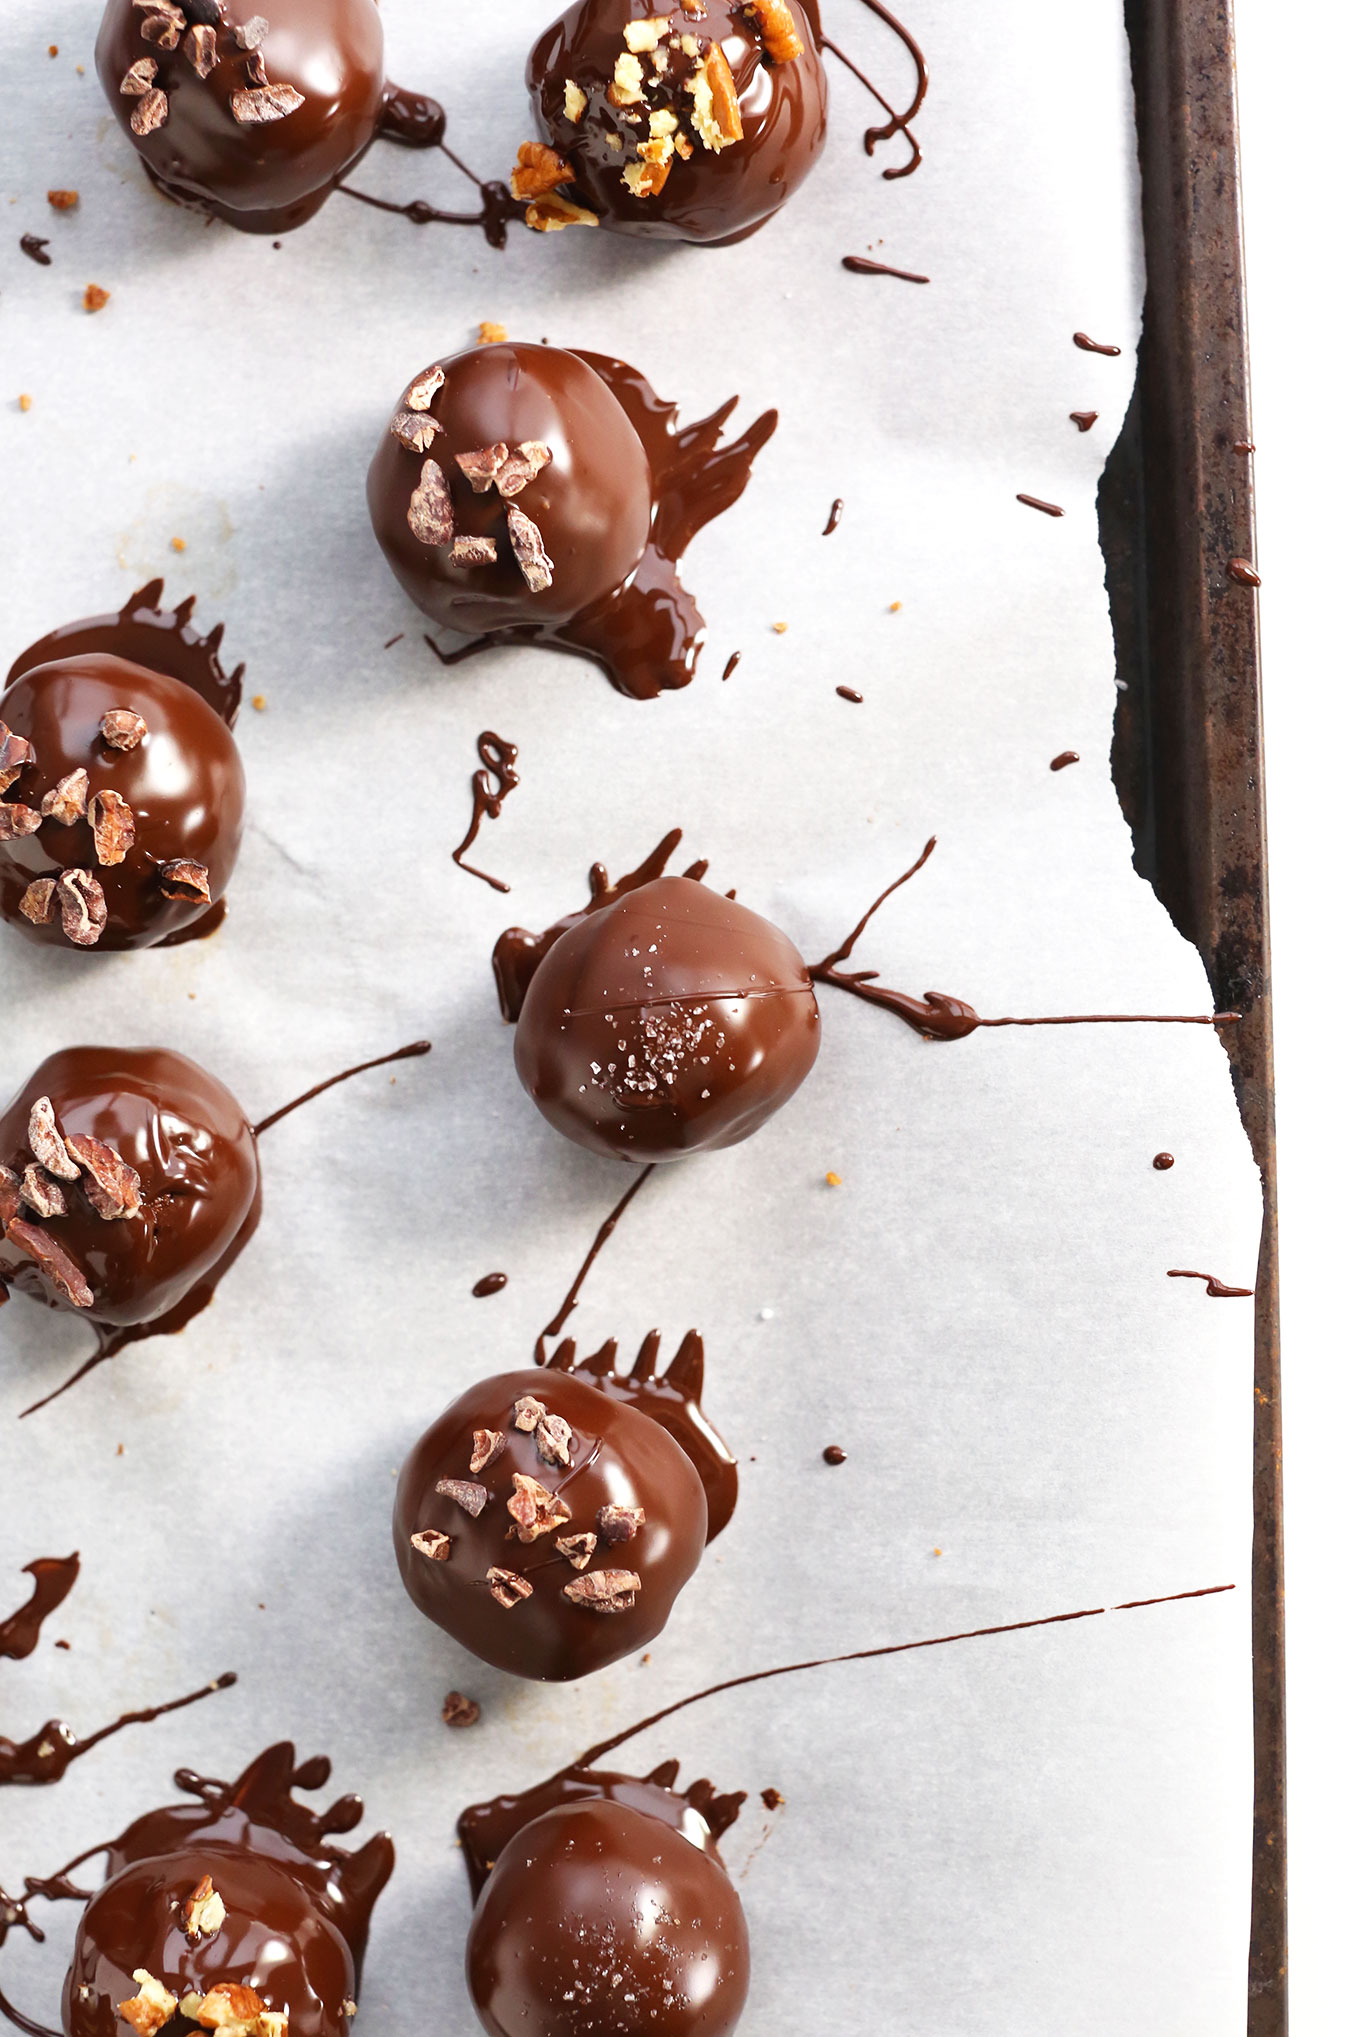 Parchment-lined baking sheet with our healthy Chocolate Vegan Truffles recipe